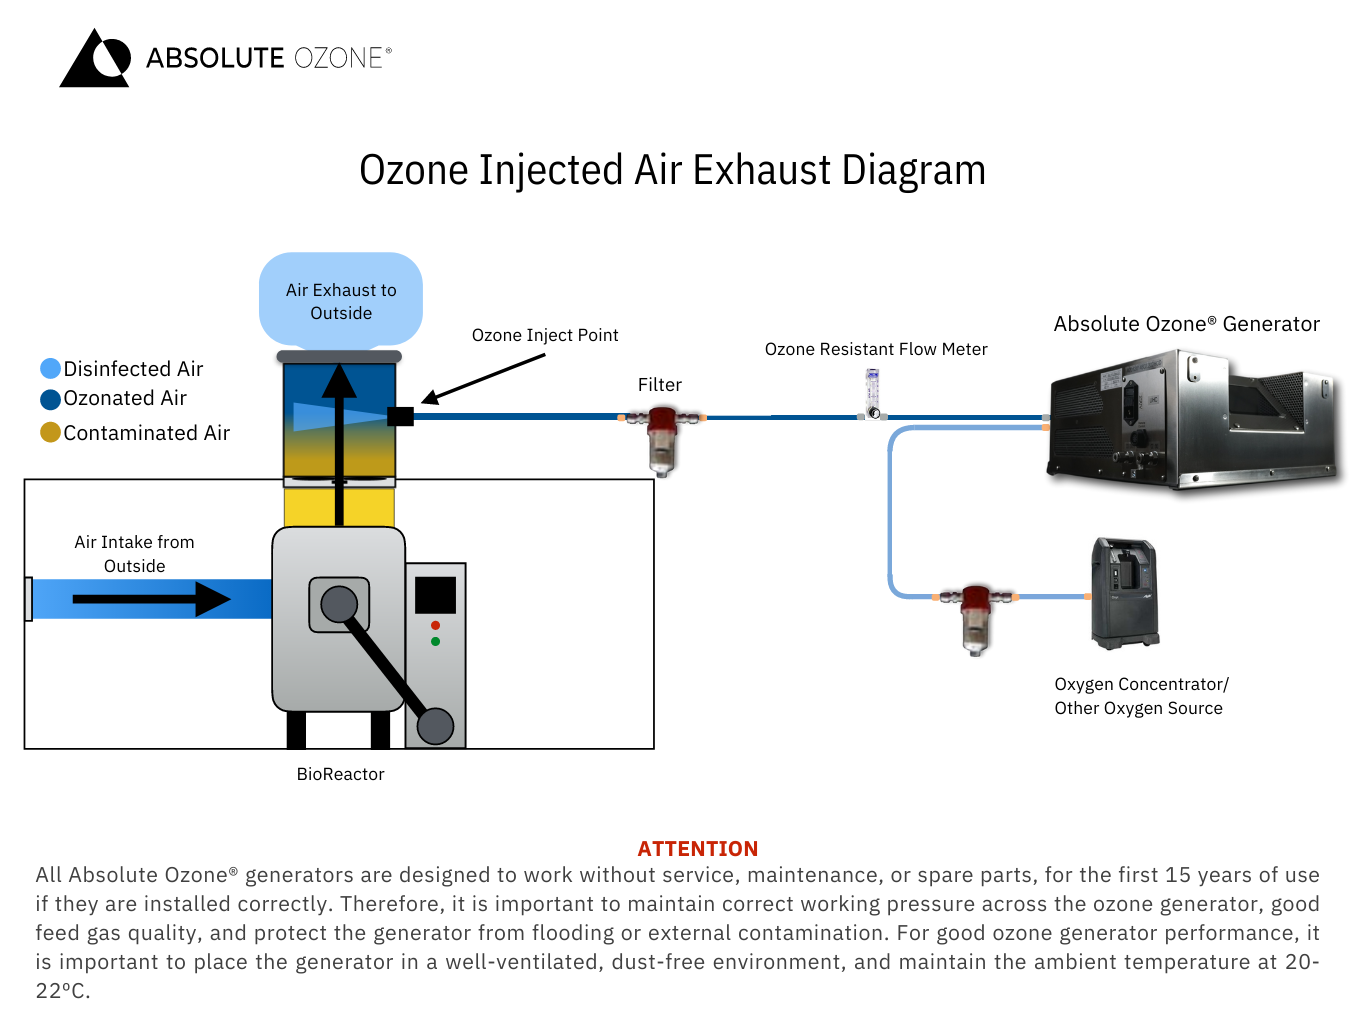 ozone injected air exhaust diagram